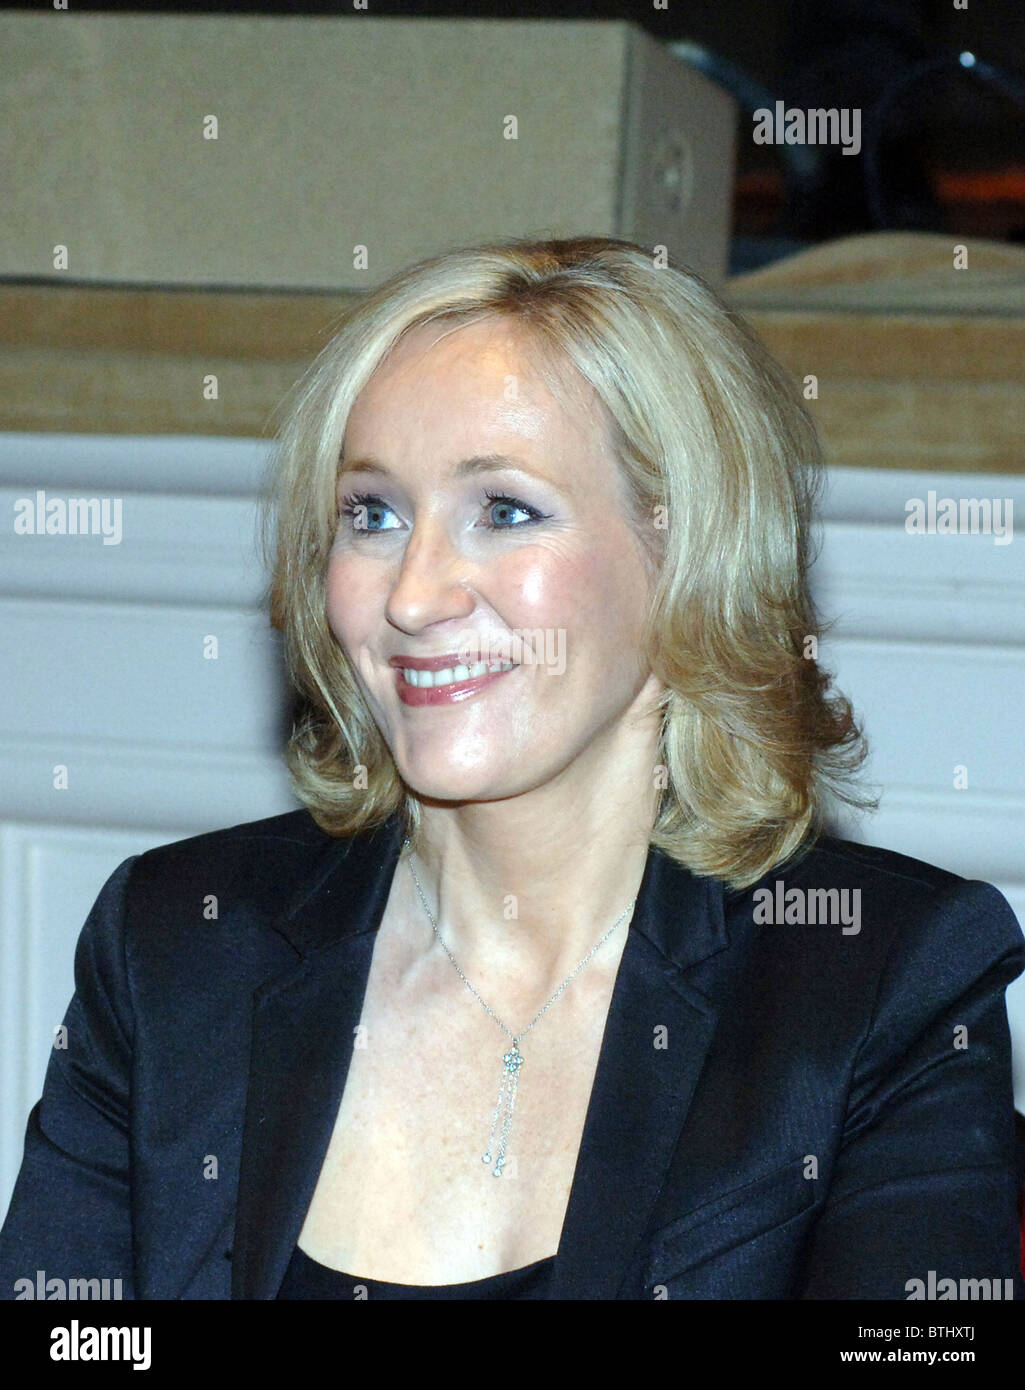 J.K. Rowling signs copies of her book 'Harry Potter and the Deathly Hallows' Stock Photo